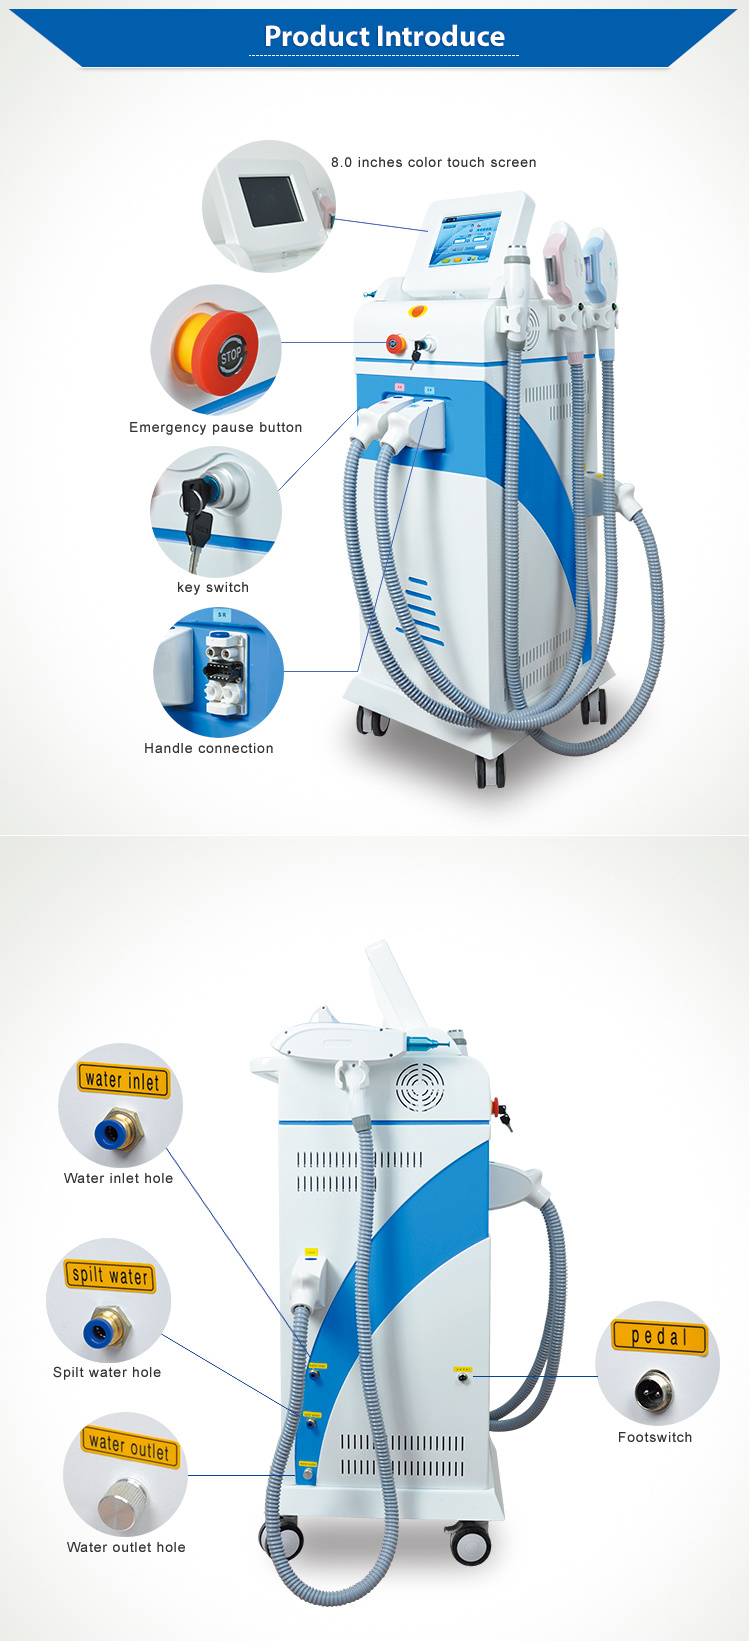 Dual Magneto-Optical Shr Hair Removal / Laser Tattoo Removal / RF Face Lifting Machine